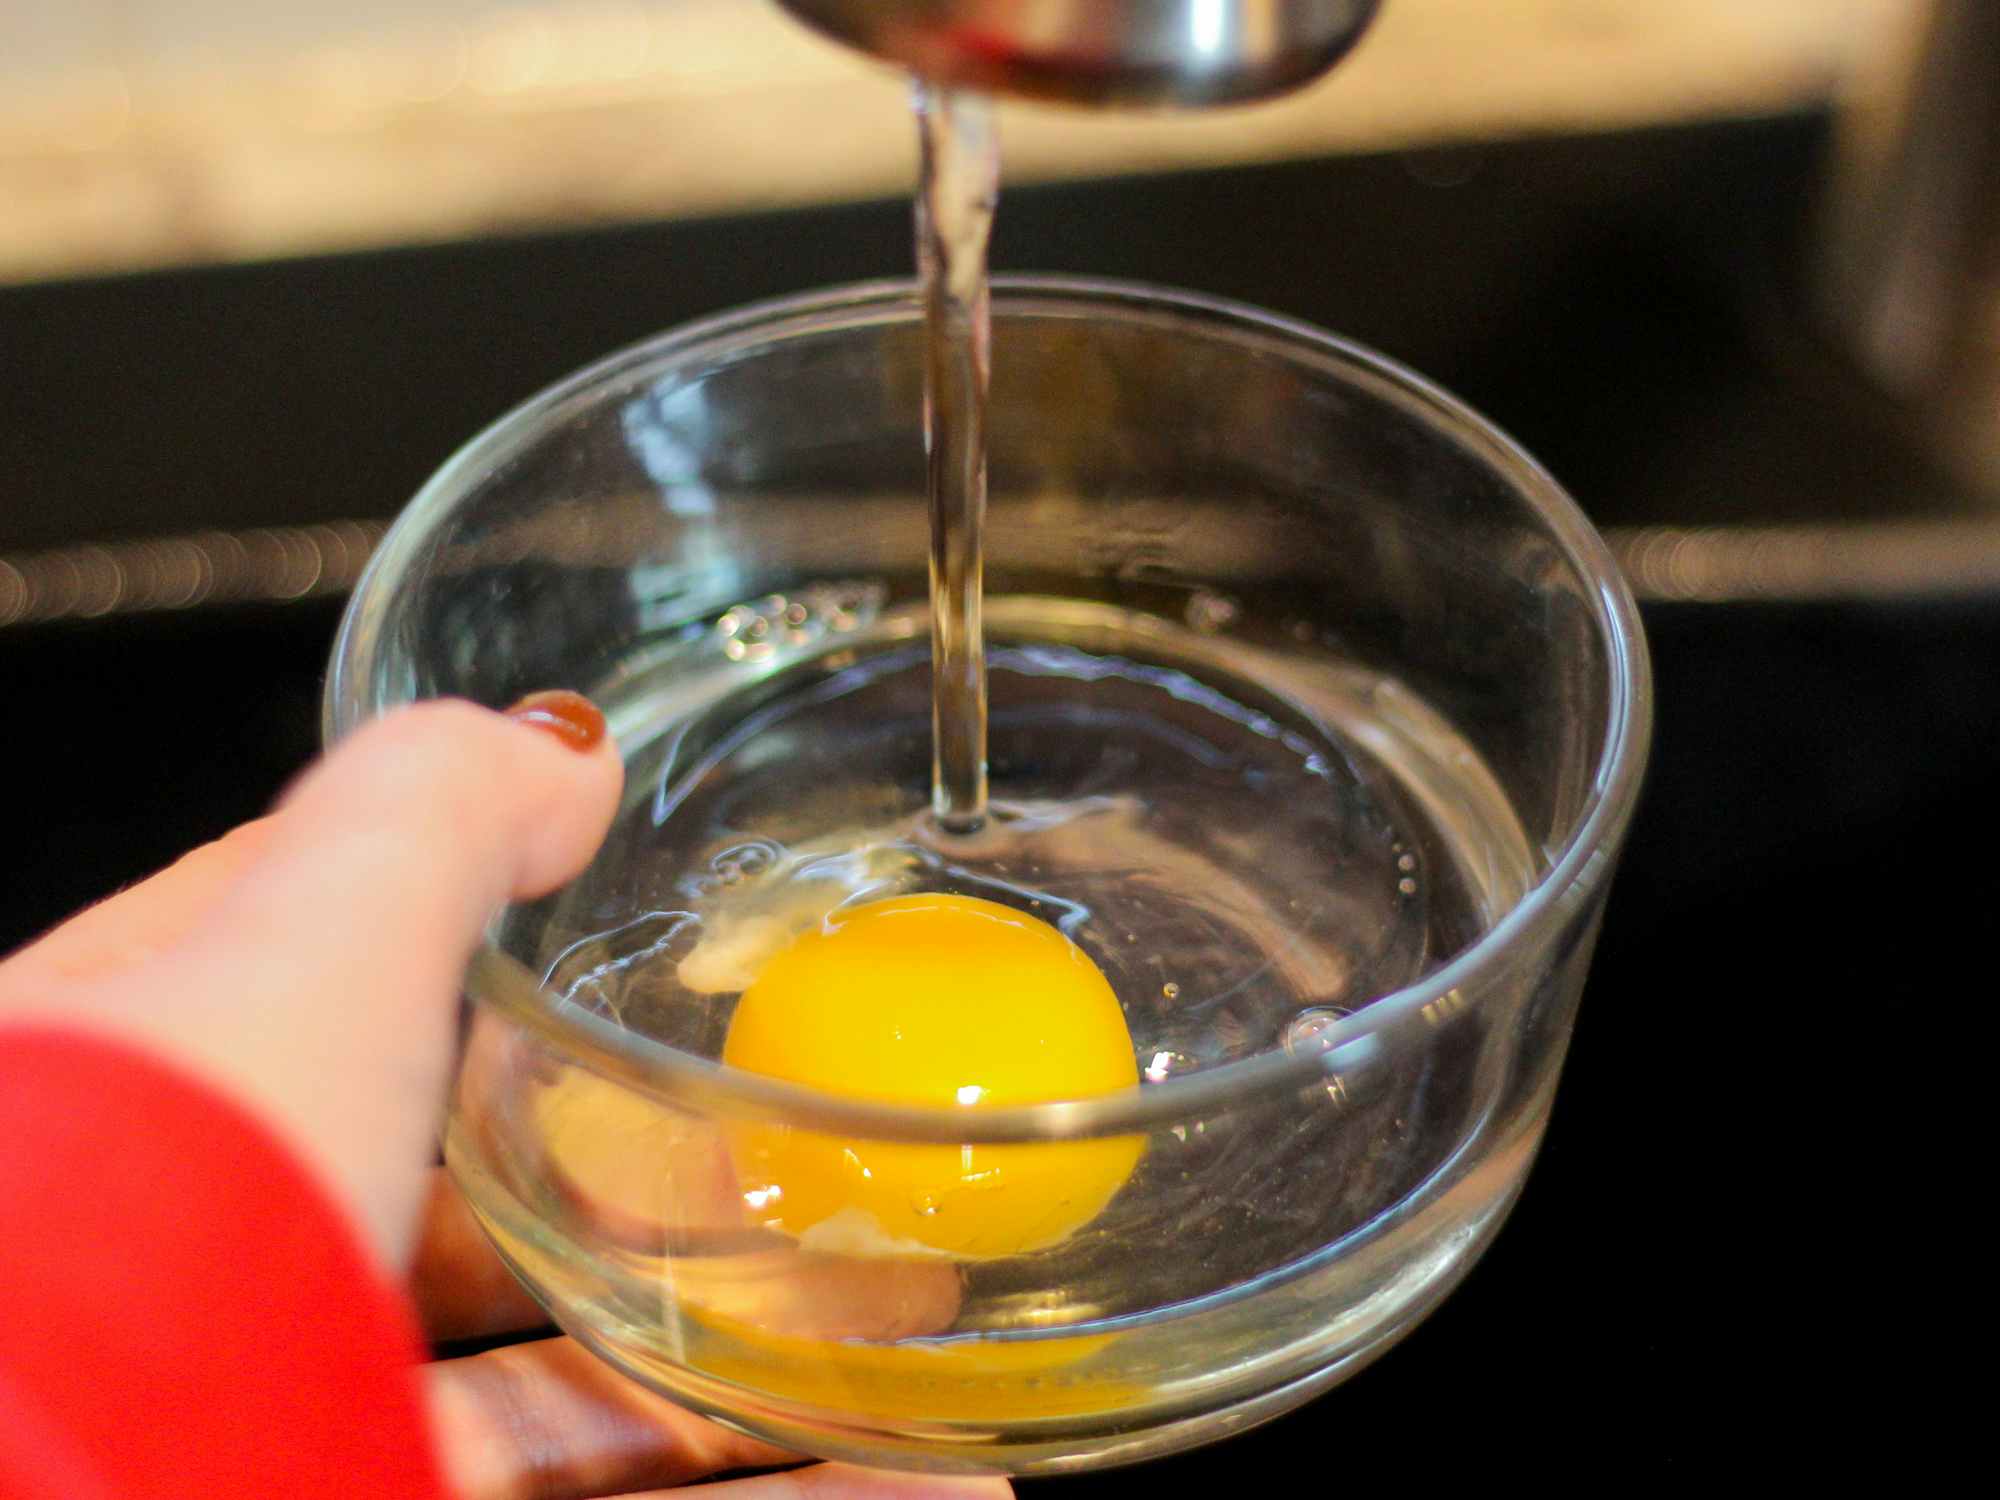 a cracked egg in a glass bowl with water from a water faucet going into the bowl